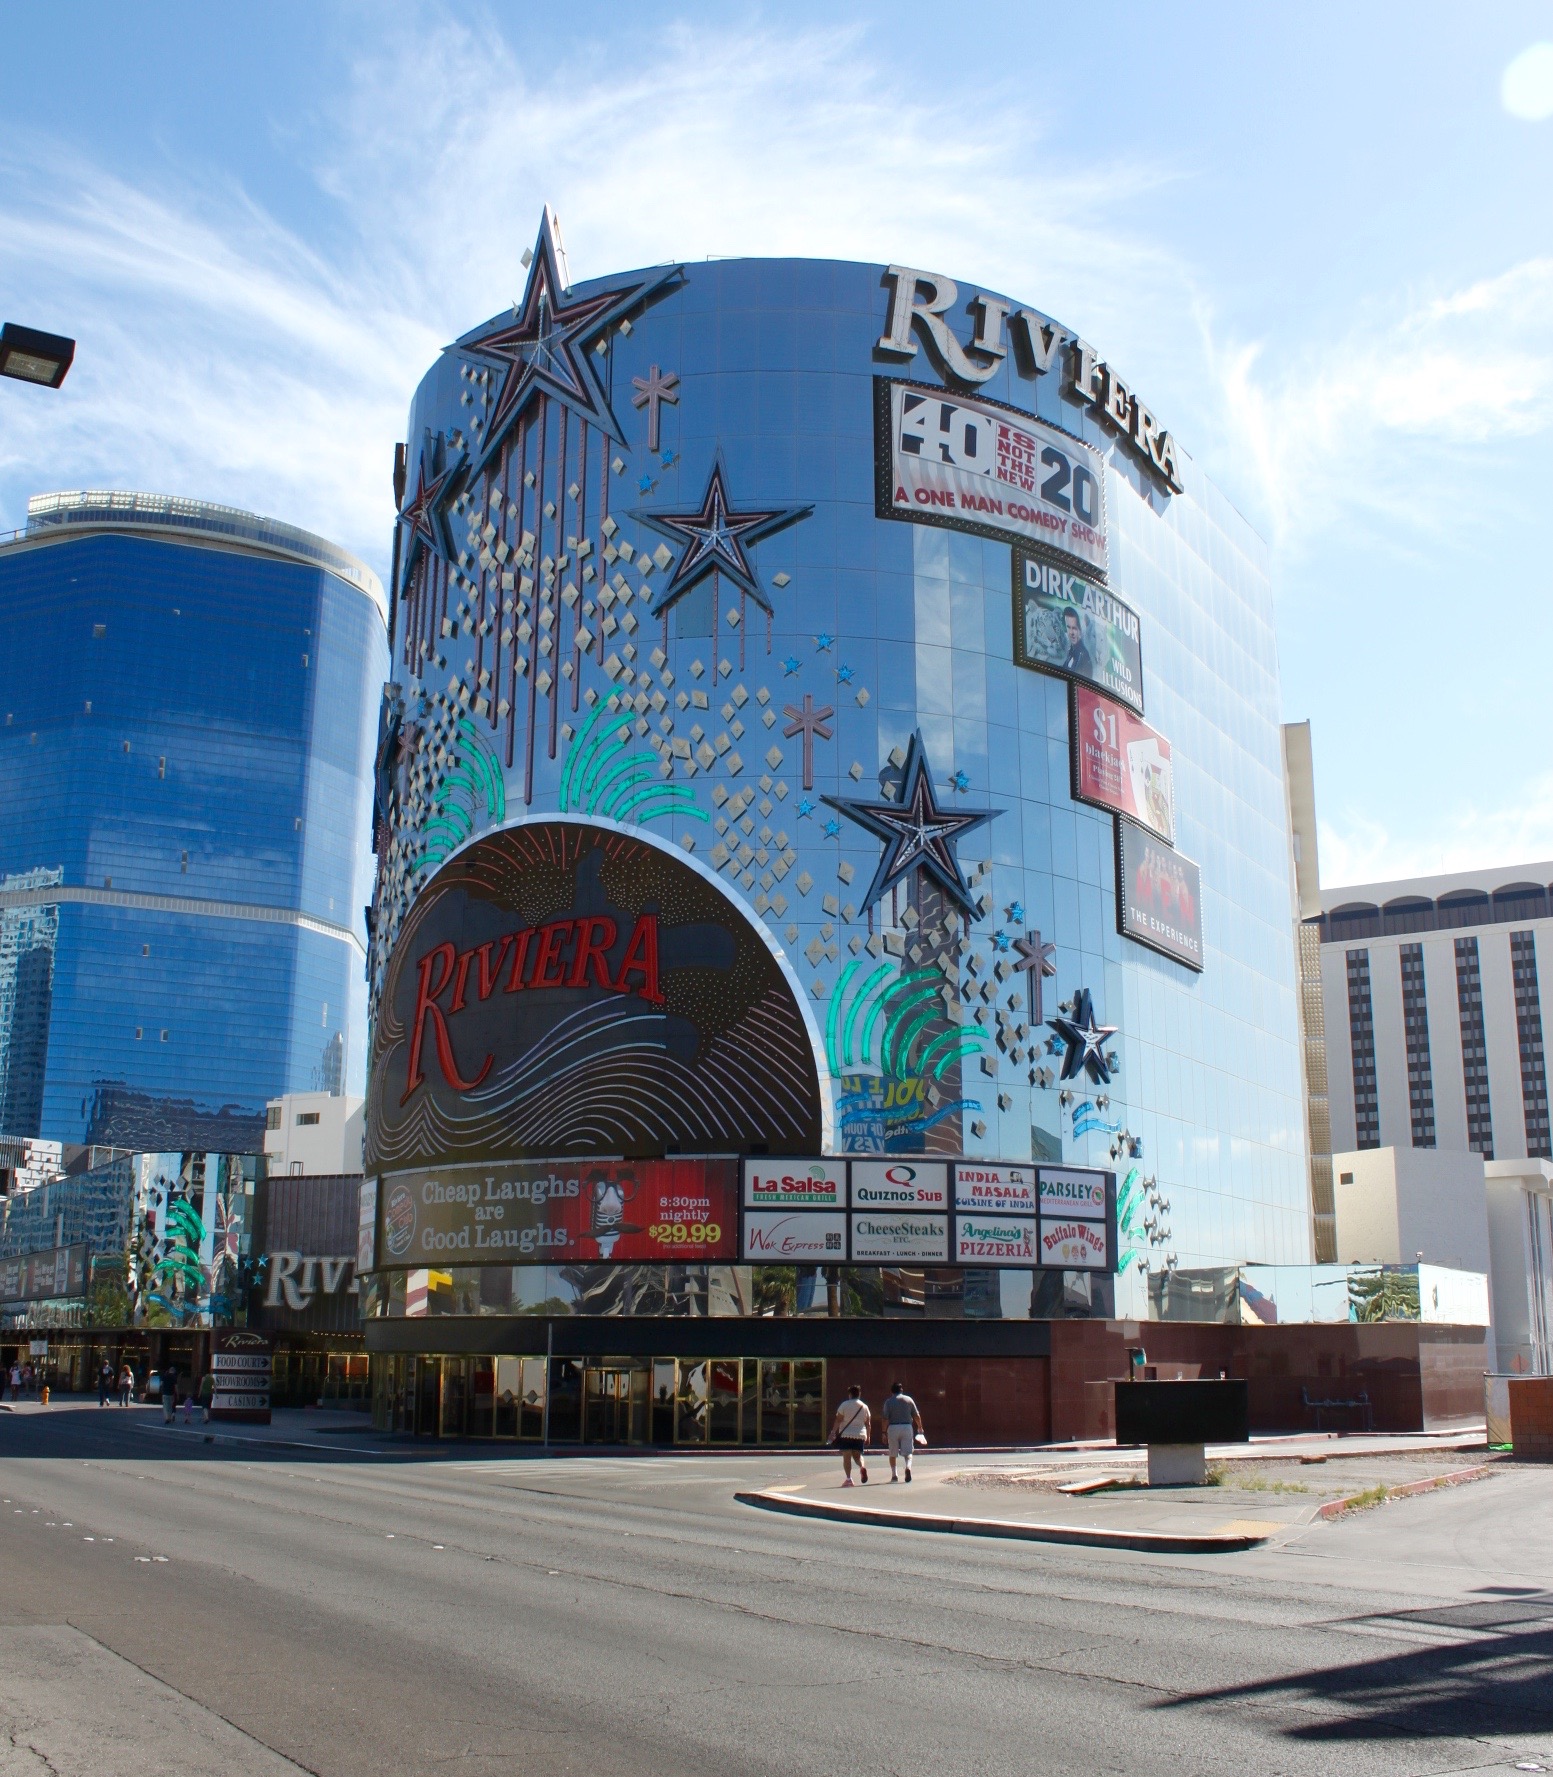 On This Date: April 20, 1955 The Riviera Hotel & Casino opened on the Las  Vegas Strip